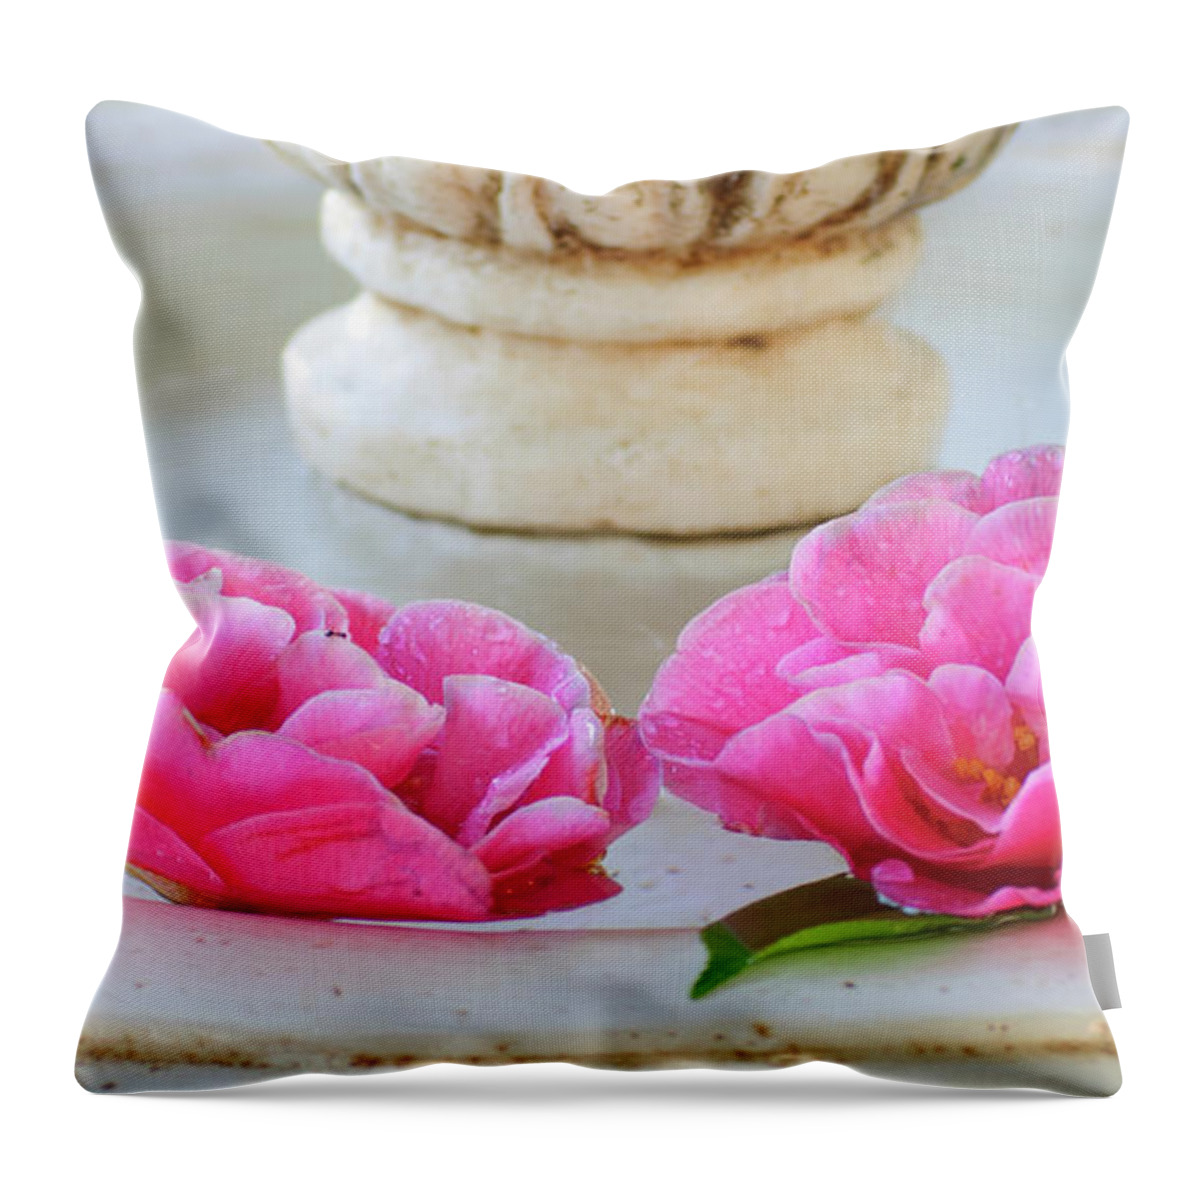 Flowers Throw Pillow featuring the photograph Floating Camellias by Diego Re